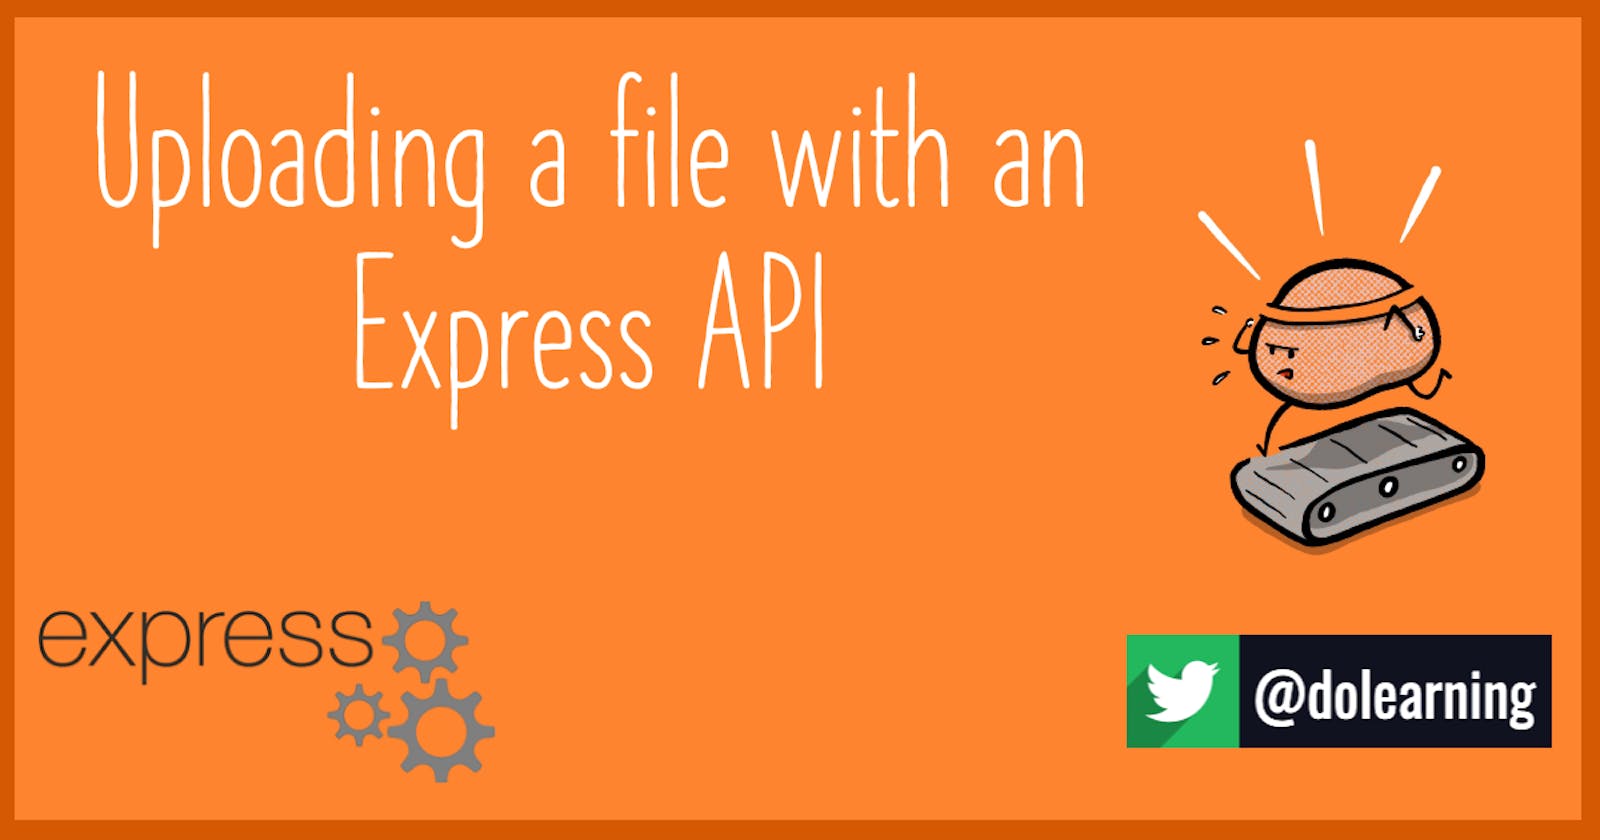 Uploading a file with an Express API